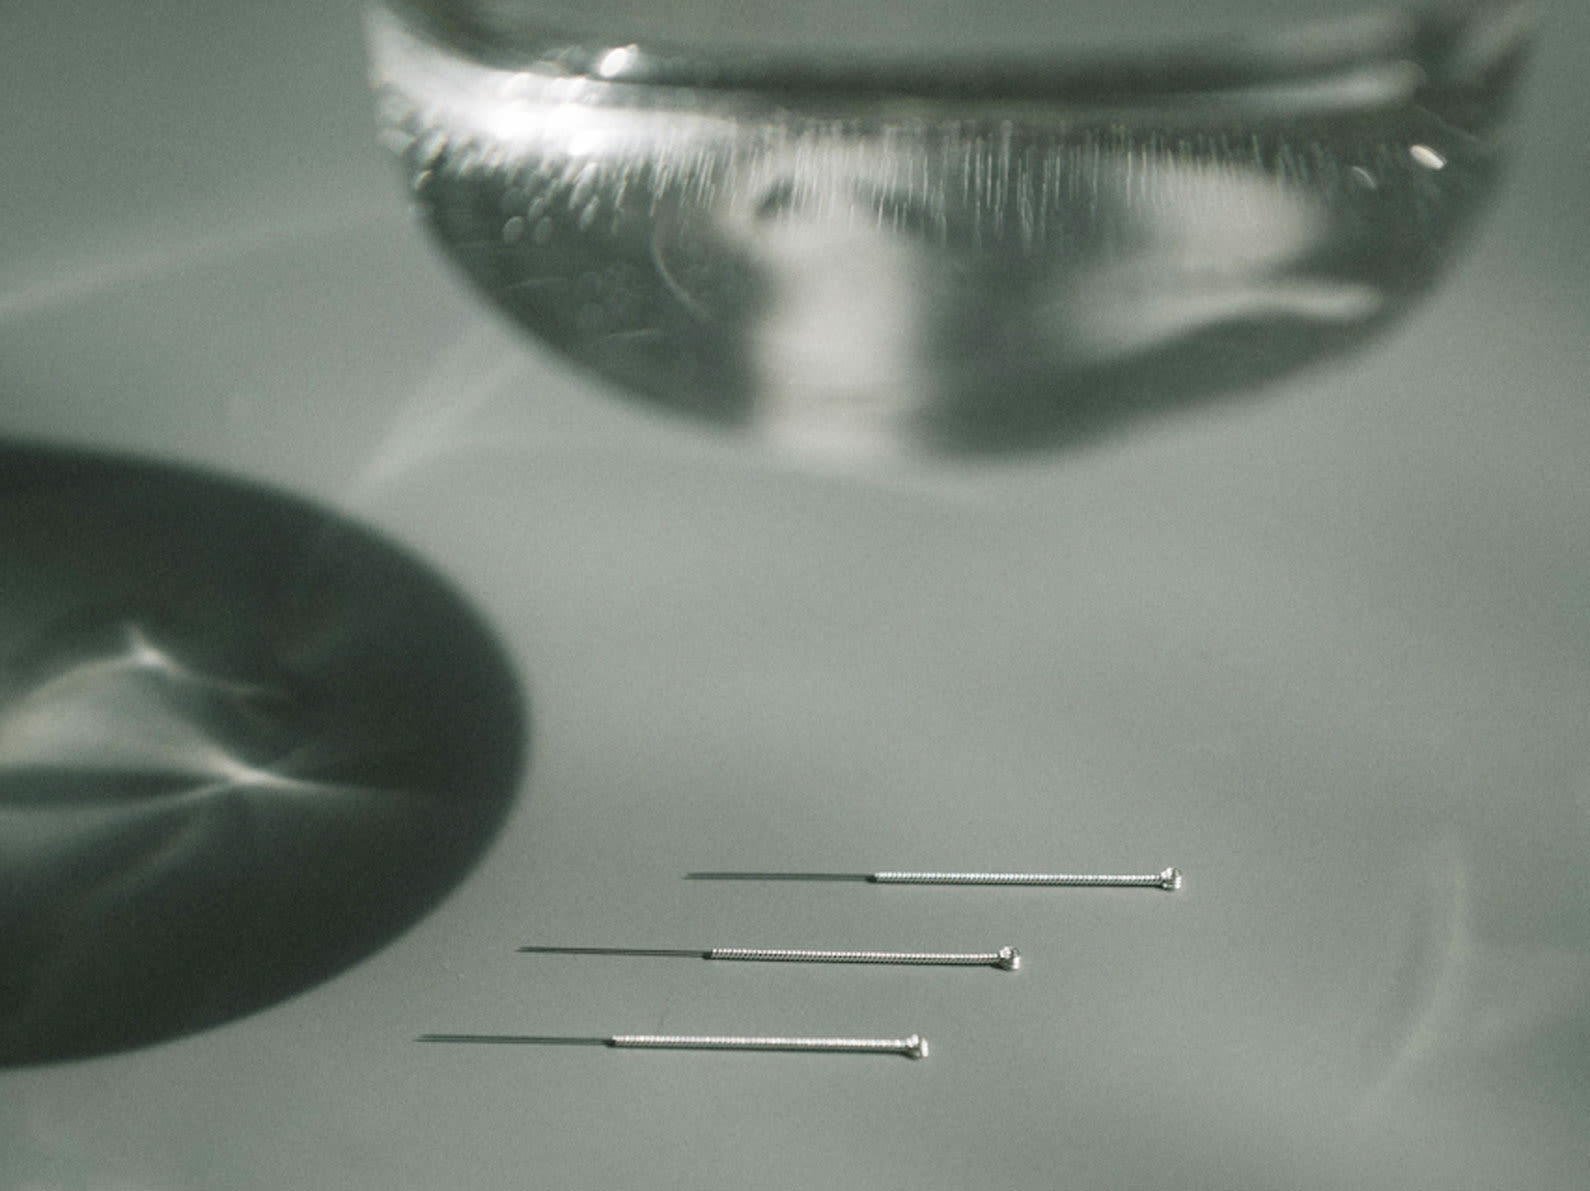 Acupuncture needles and a glass of water